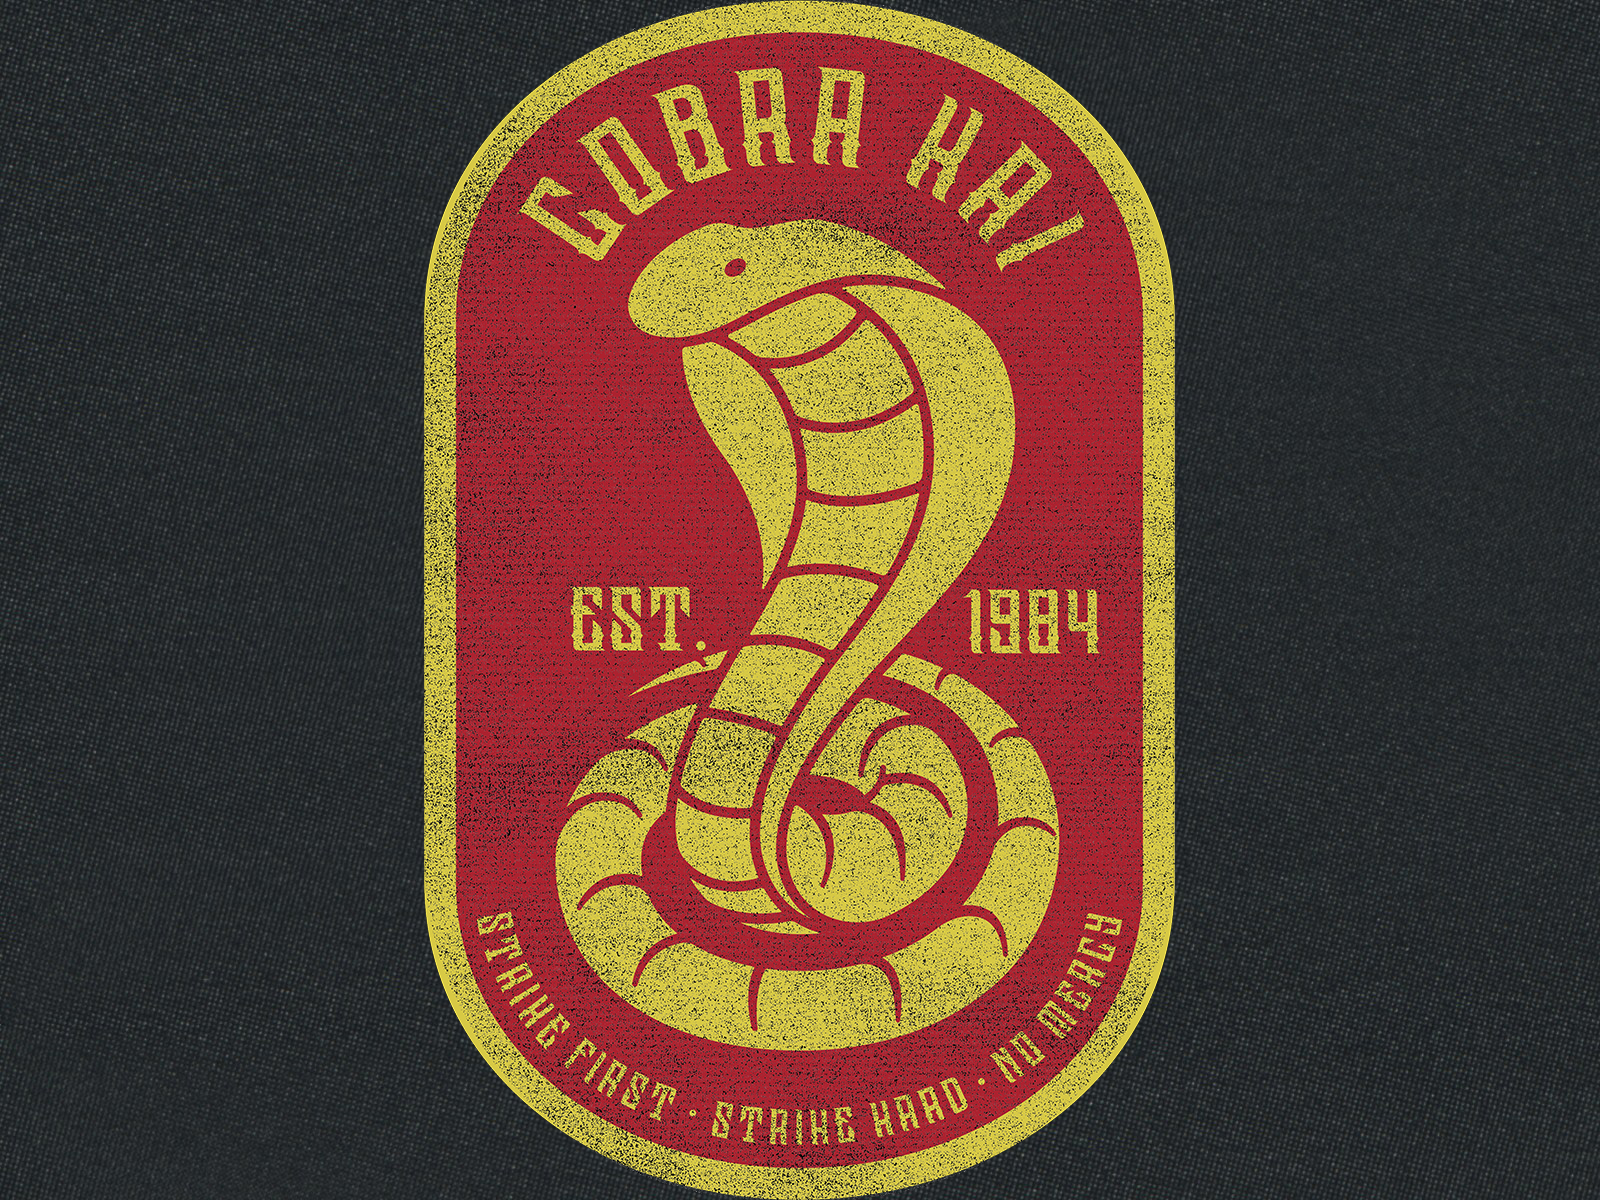 Cobra Kai 2020 by Justin Seeley on Dribbble